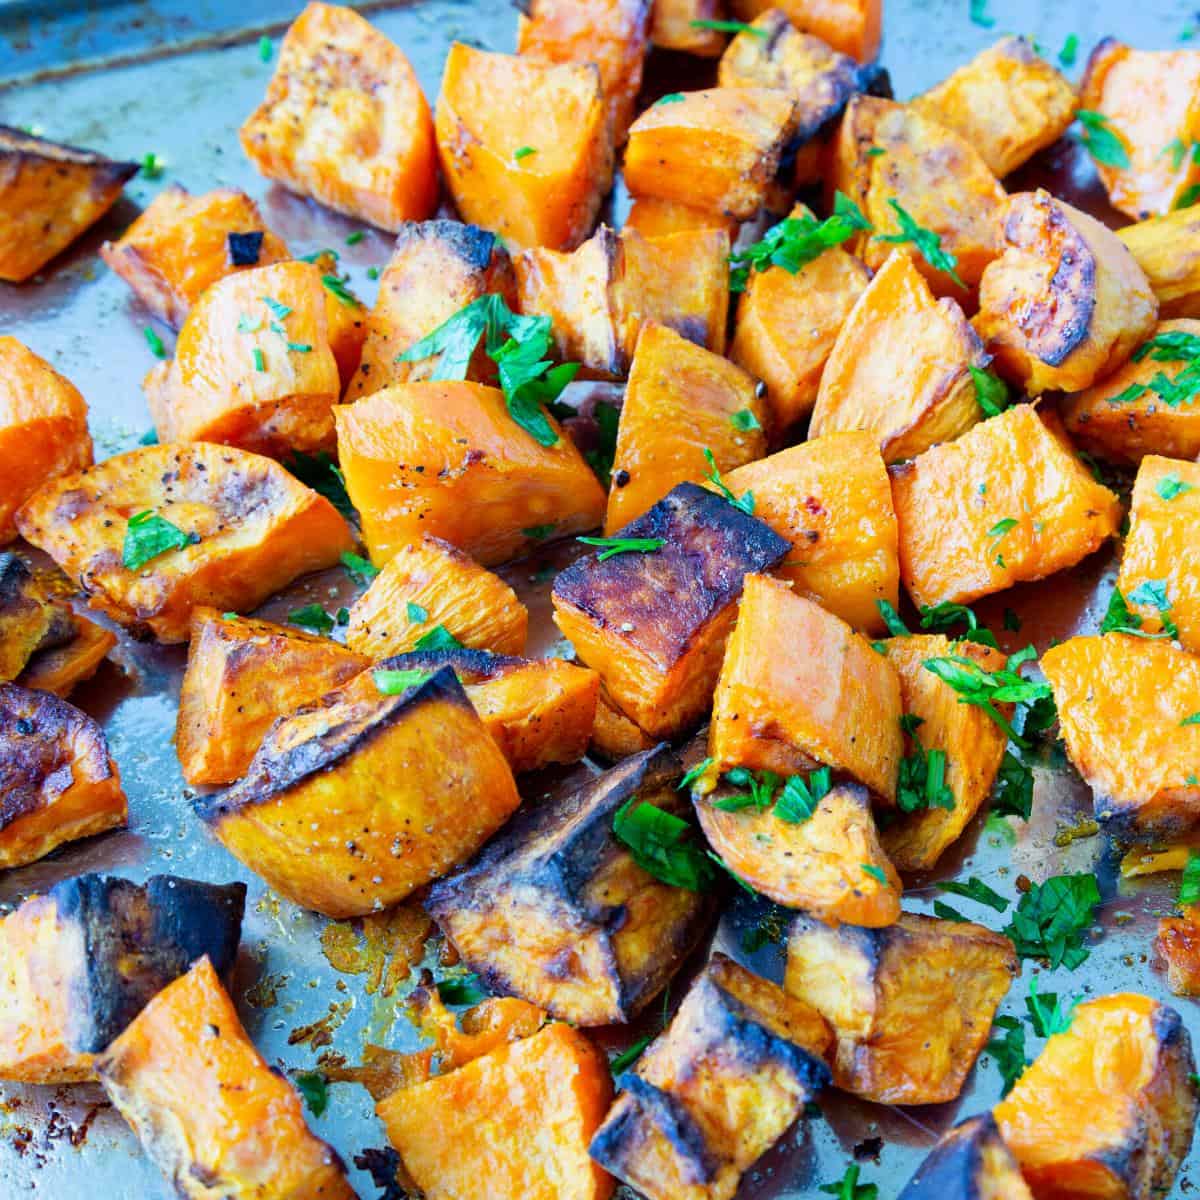 A baking tray with cubes of roasted sweet potatoes.